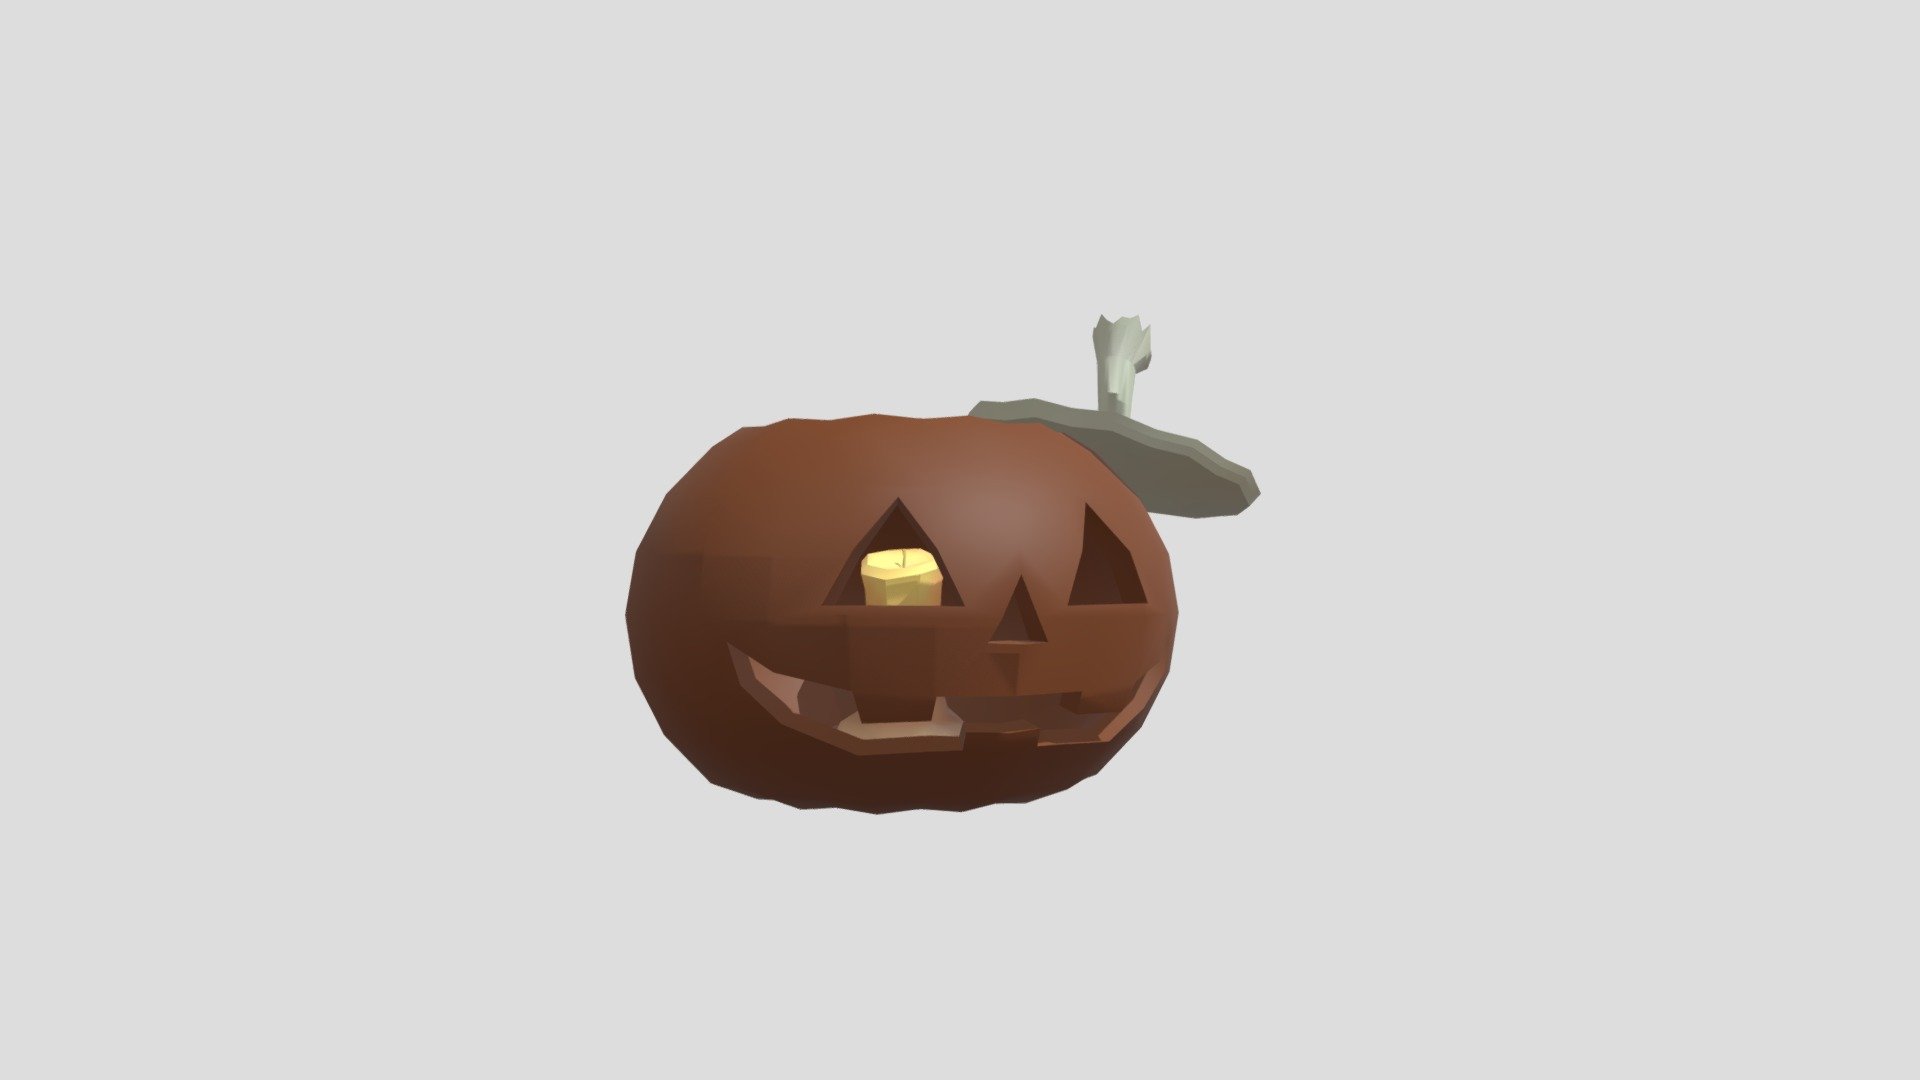 Is there a discord server or something that can give me free 3D models of gorilla  tag maps? I've been looking for a 3D model of the new Halloween update for  an